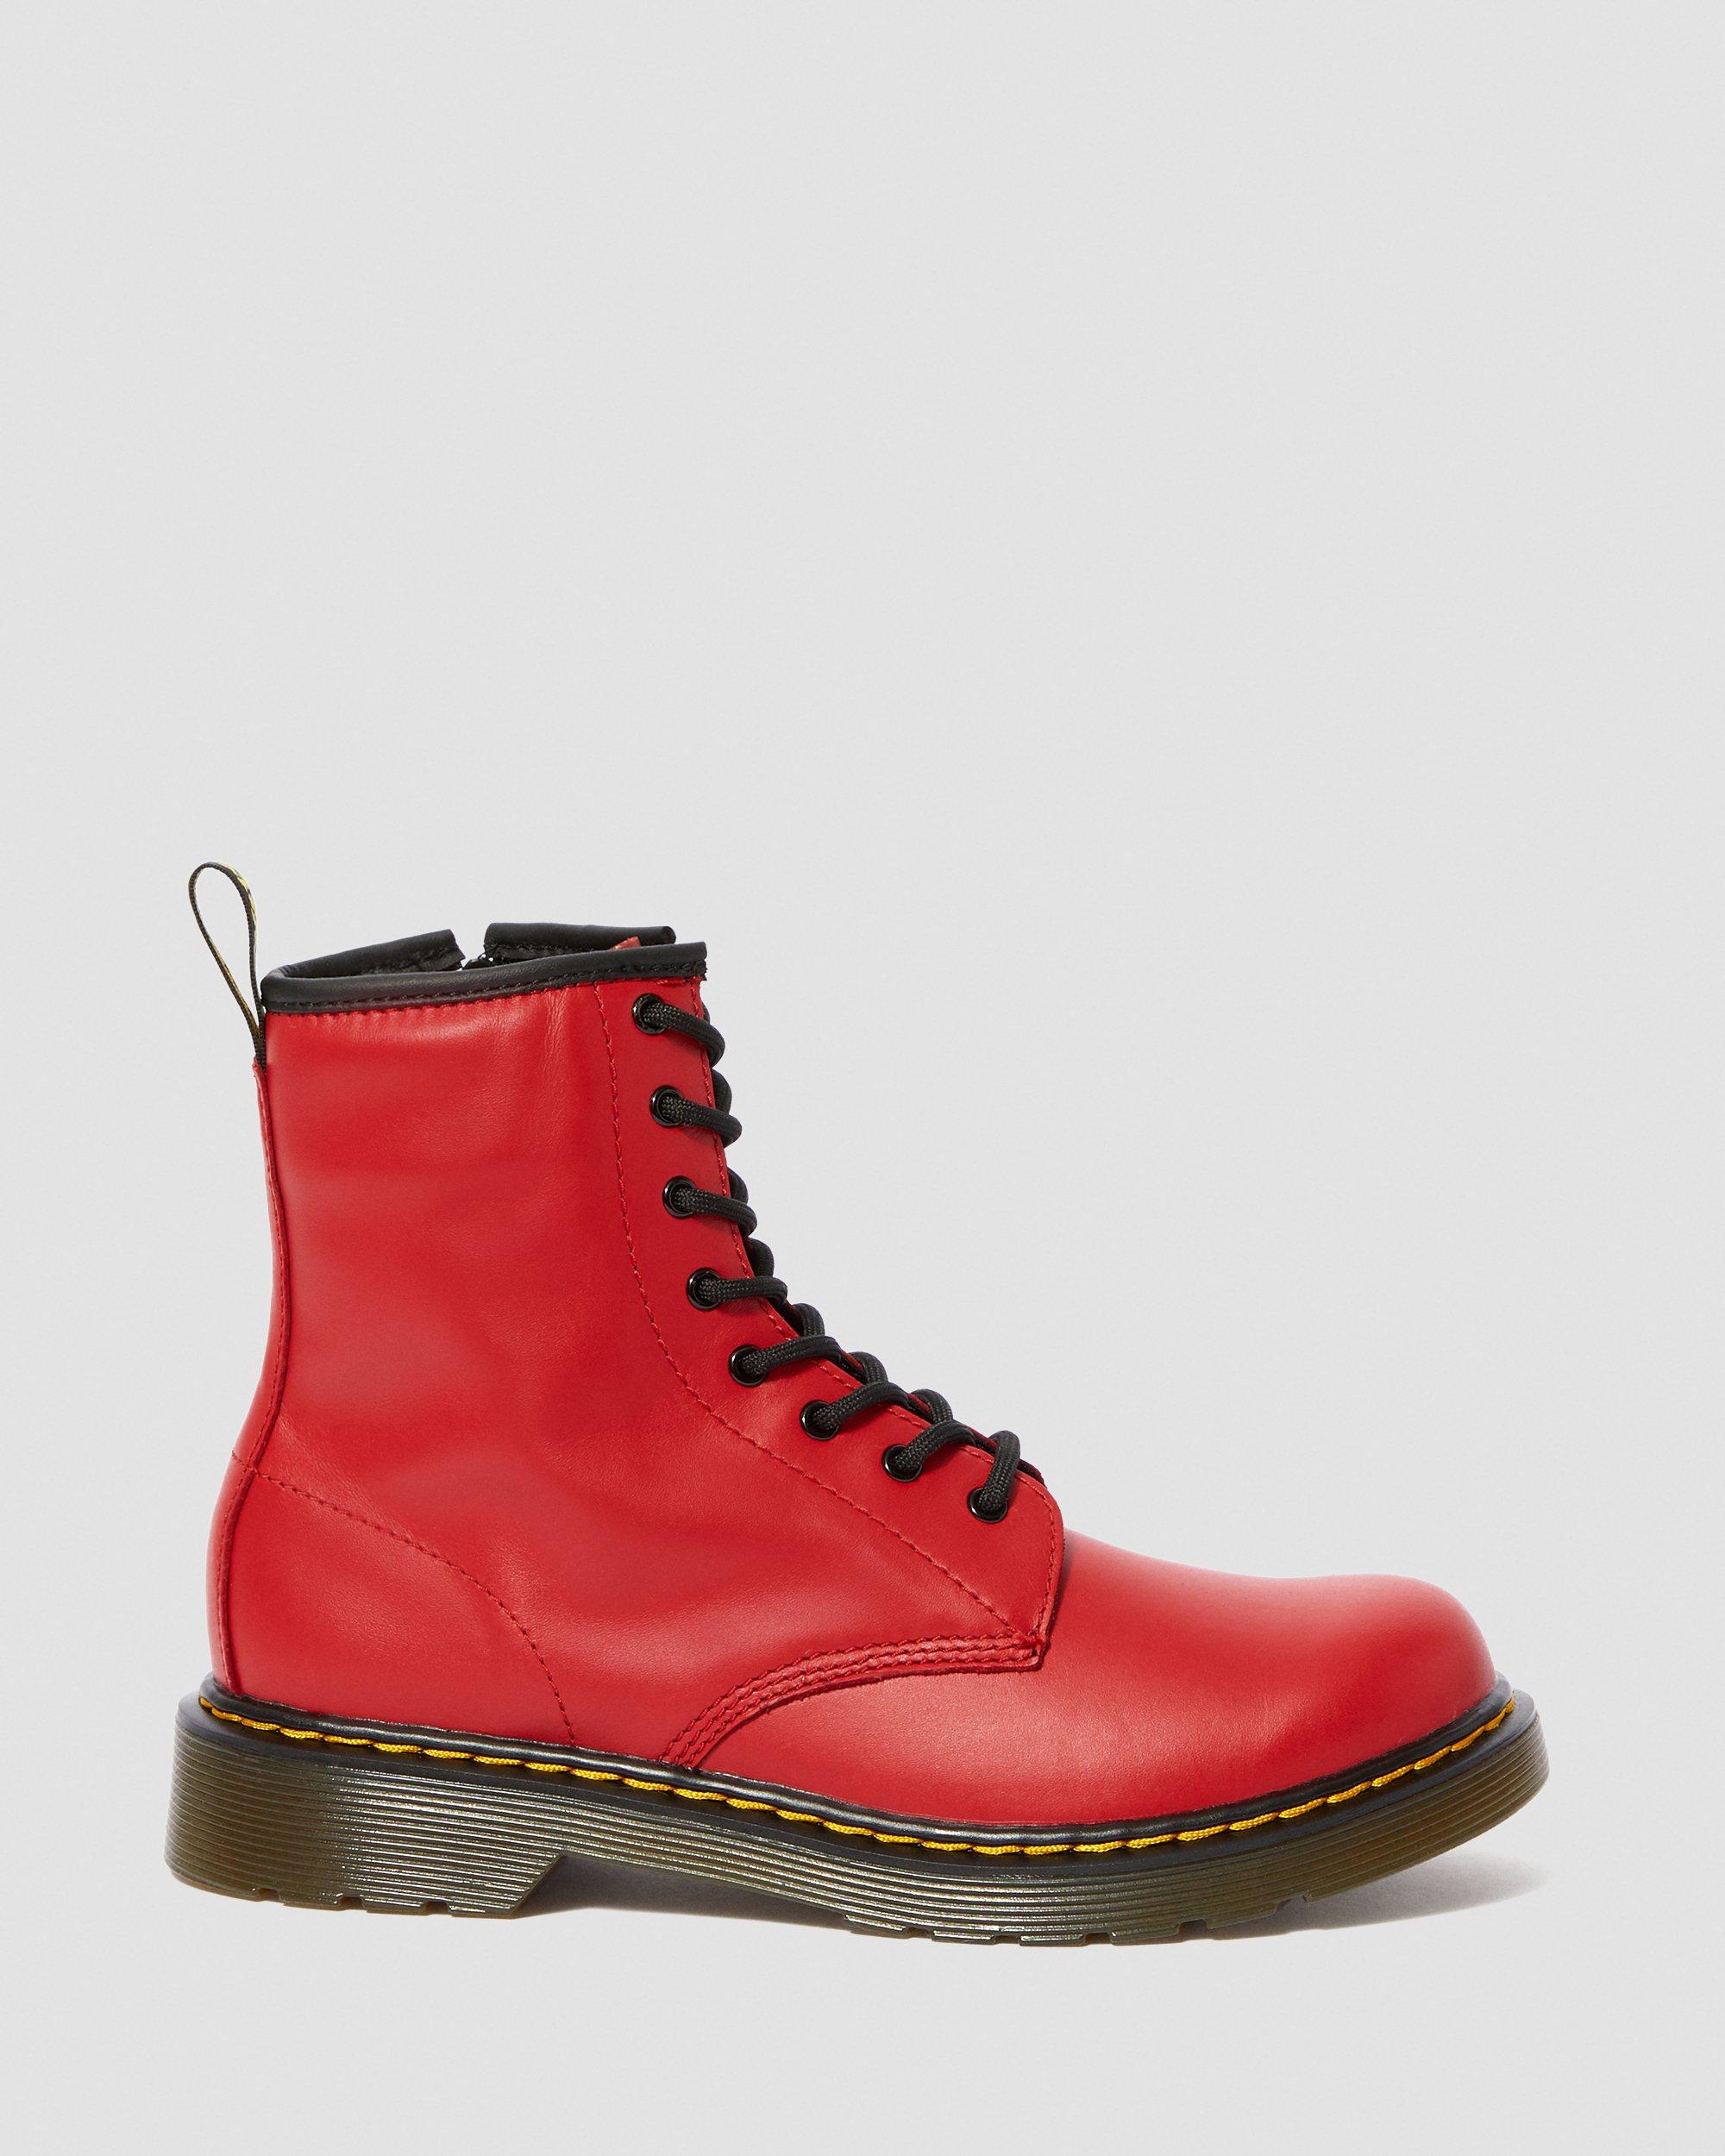 How to Dress Up Doc Martens - stylishly good vibes